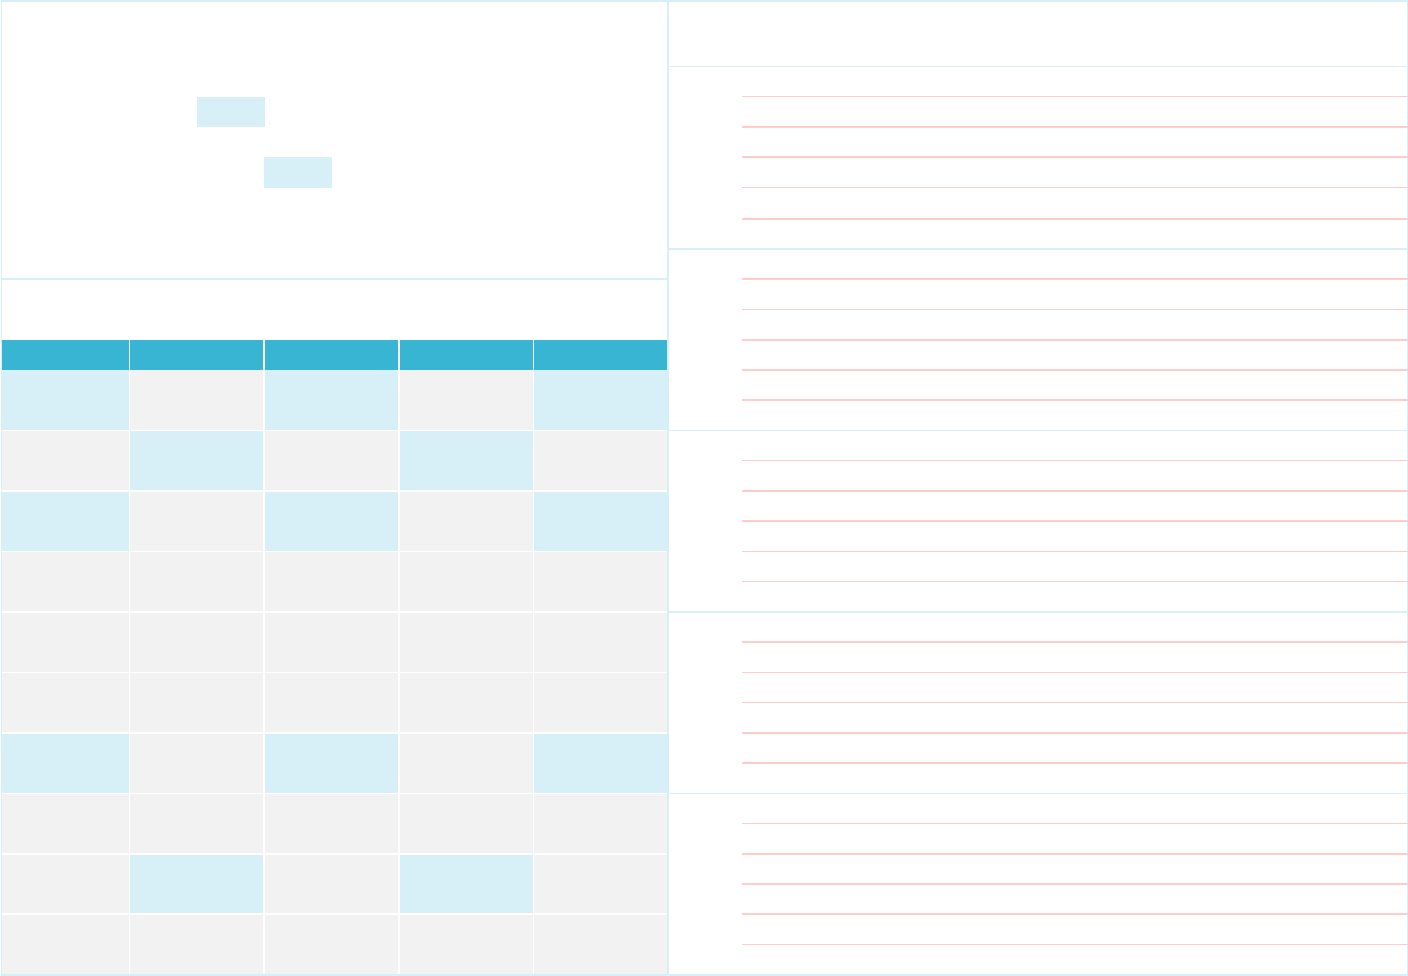 Student Weekly Schedule Template